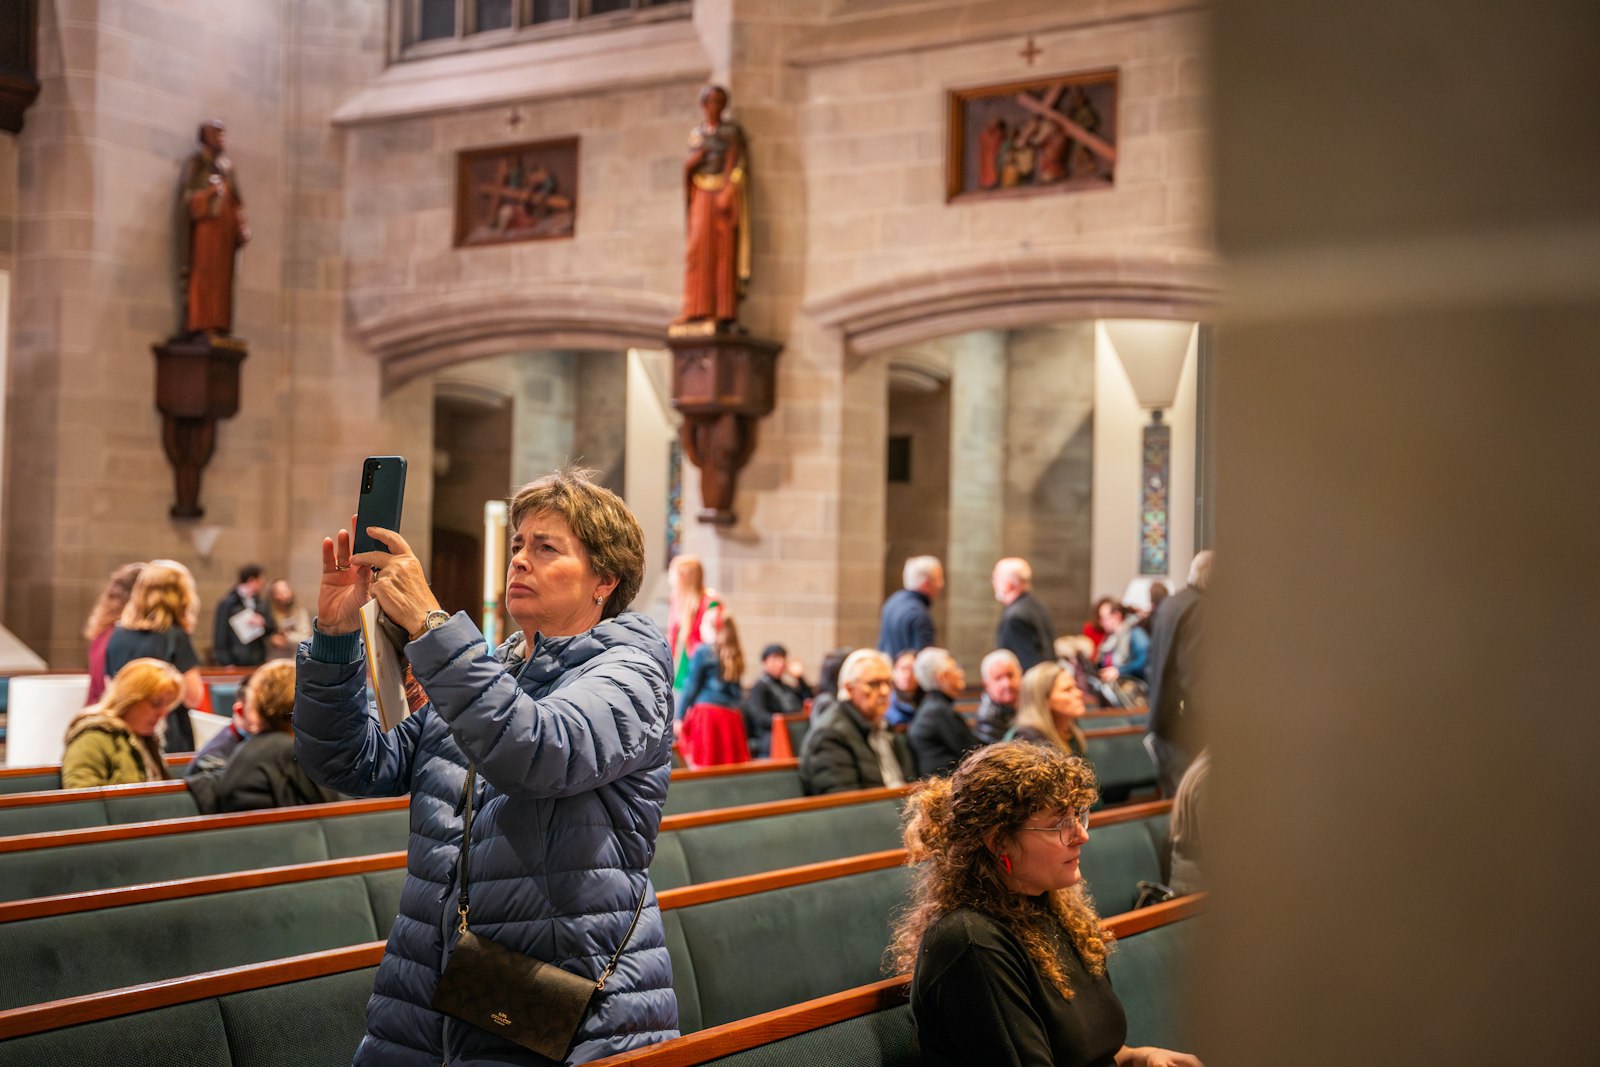 A woman takes a picture of one of the newly installed statues and relics. The "Journey with the Saints" pilgrimage will be permanently available for those who visit the cathedral, and those who experience miracles as a result of their prayers are invited to return to contribute to a planned new mosaic.